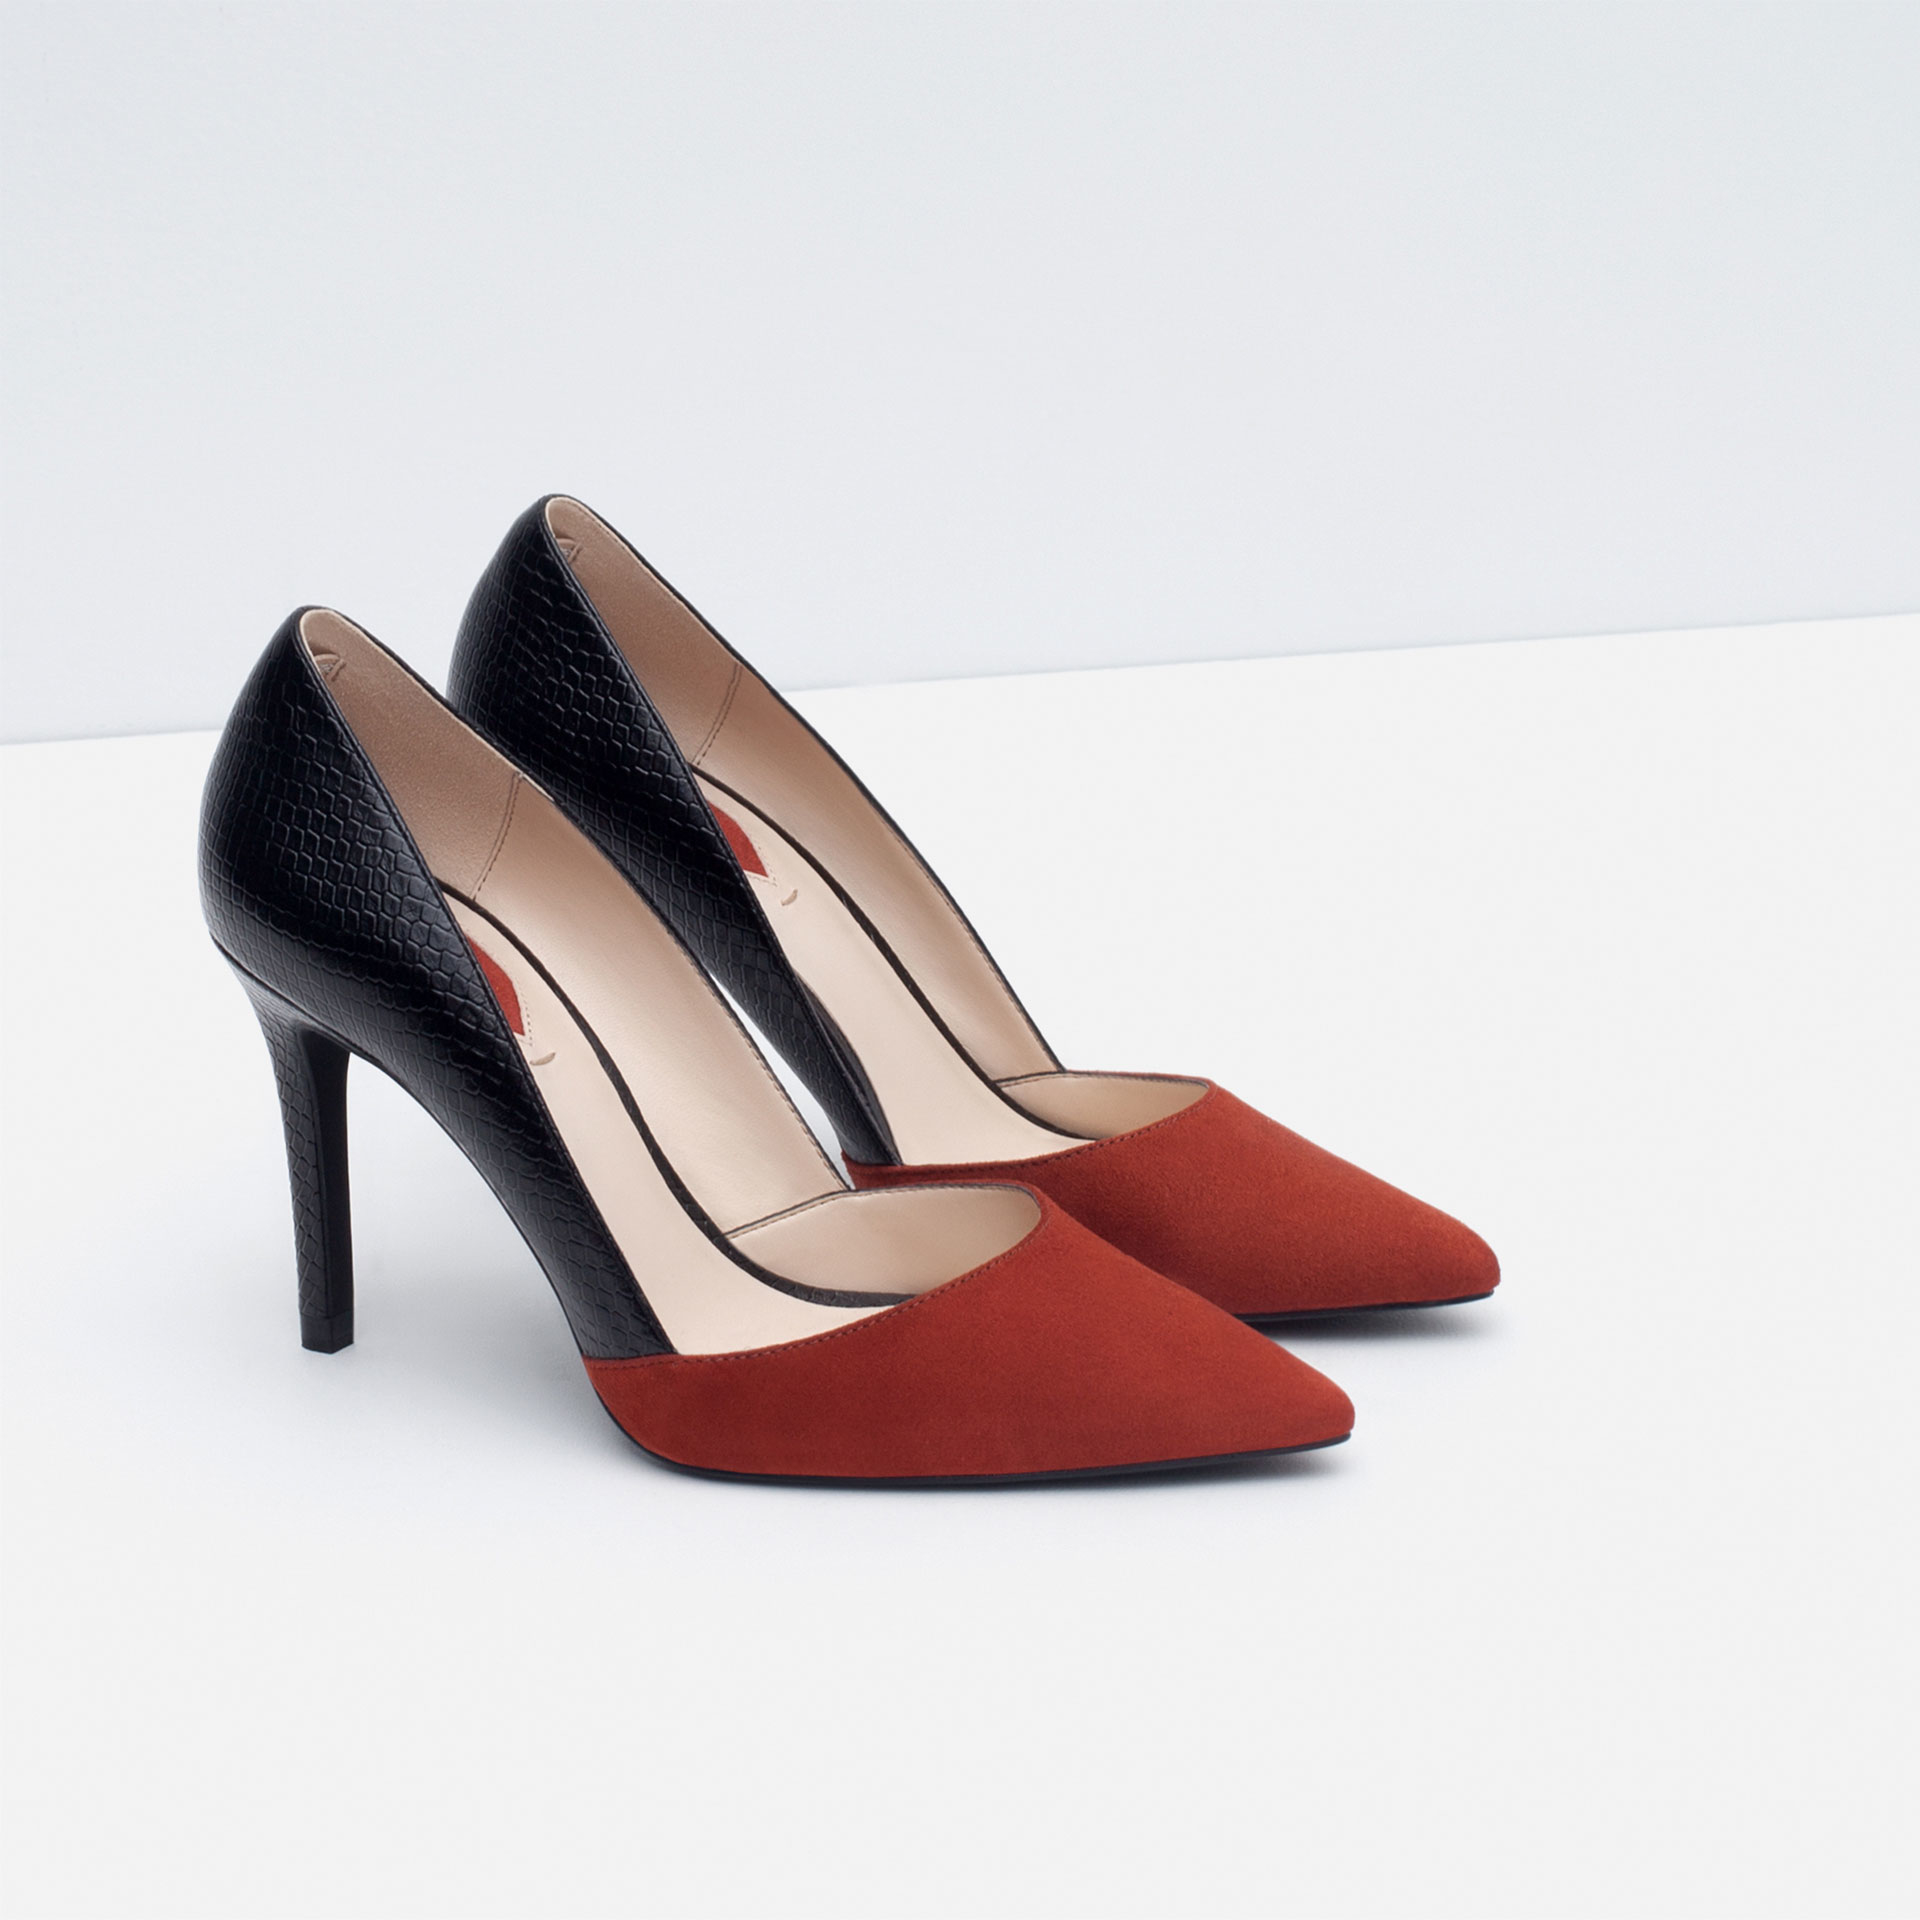  Zara  Mid Heel Combined Court Shoes in Red Multicolour Lyst